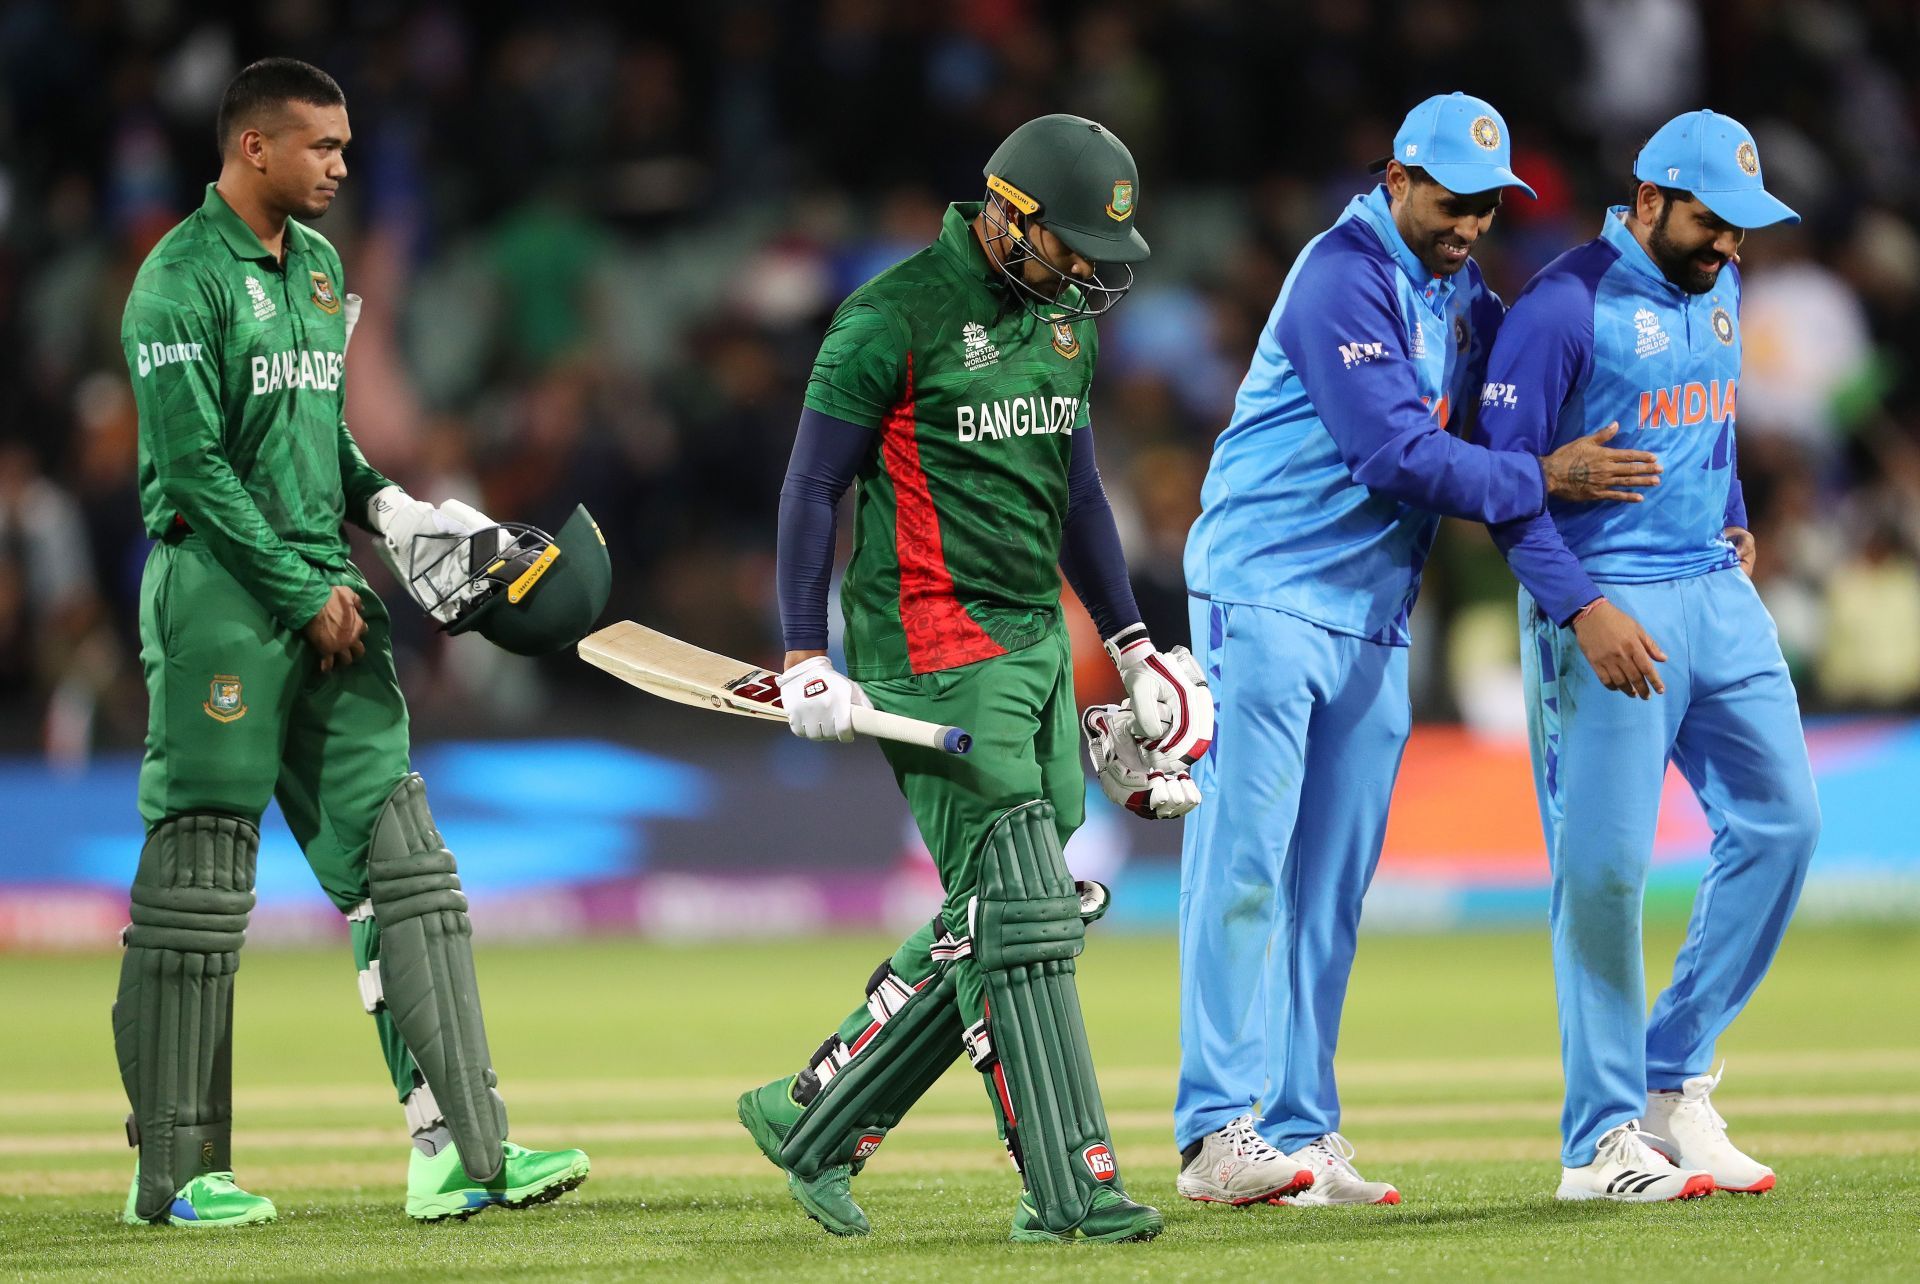 Bangladesh lost against India in T20 World Cup 2022 earlier this year (Image: Getty)